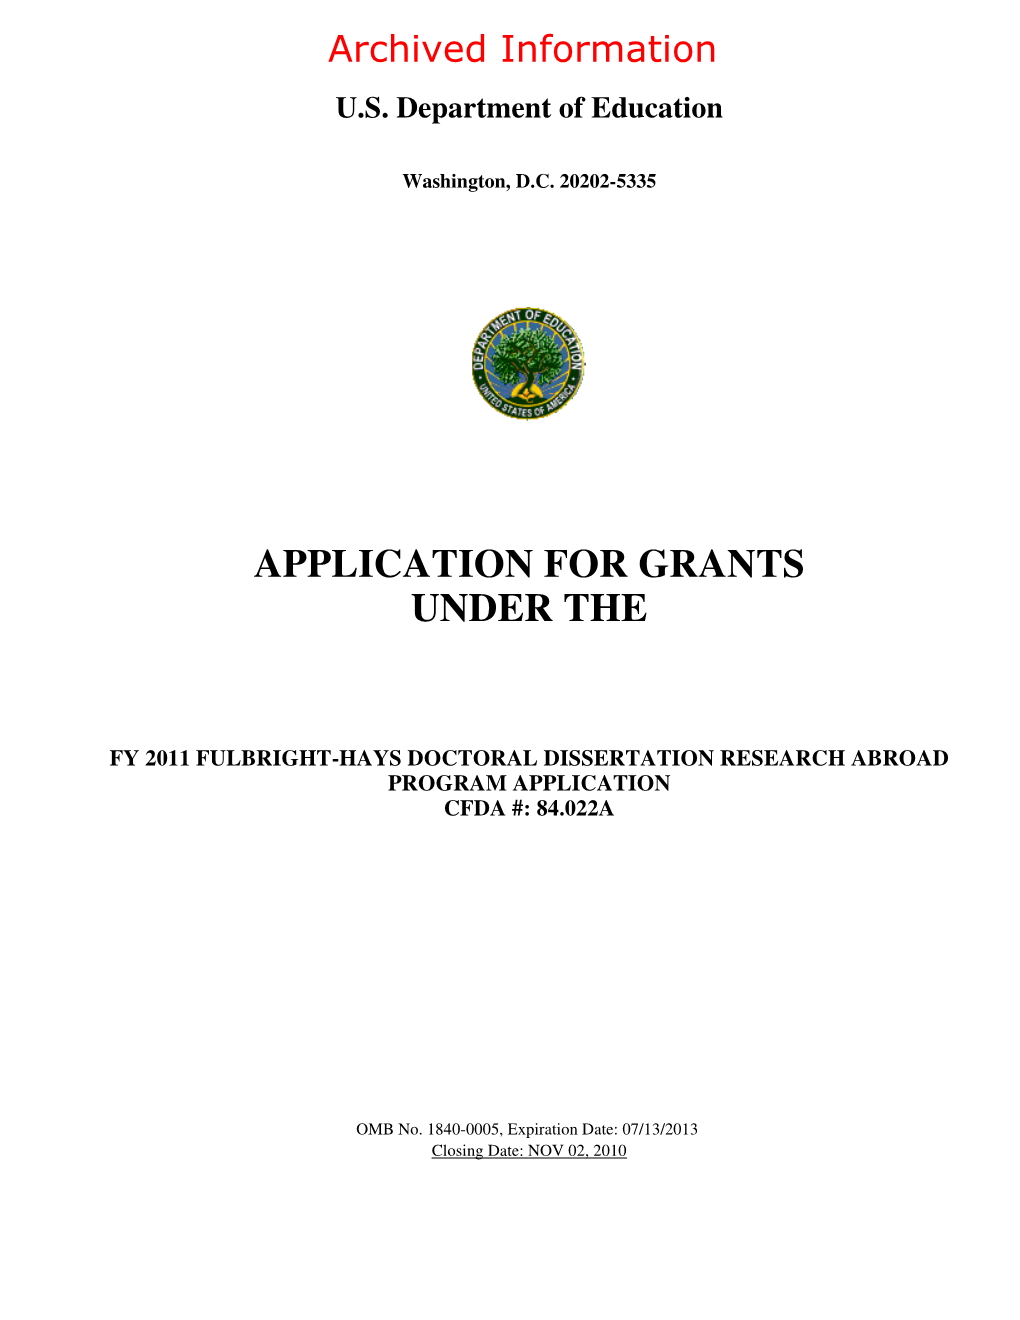 Archived: FY 2011 Grant Application For